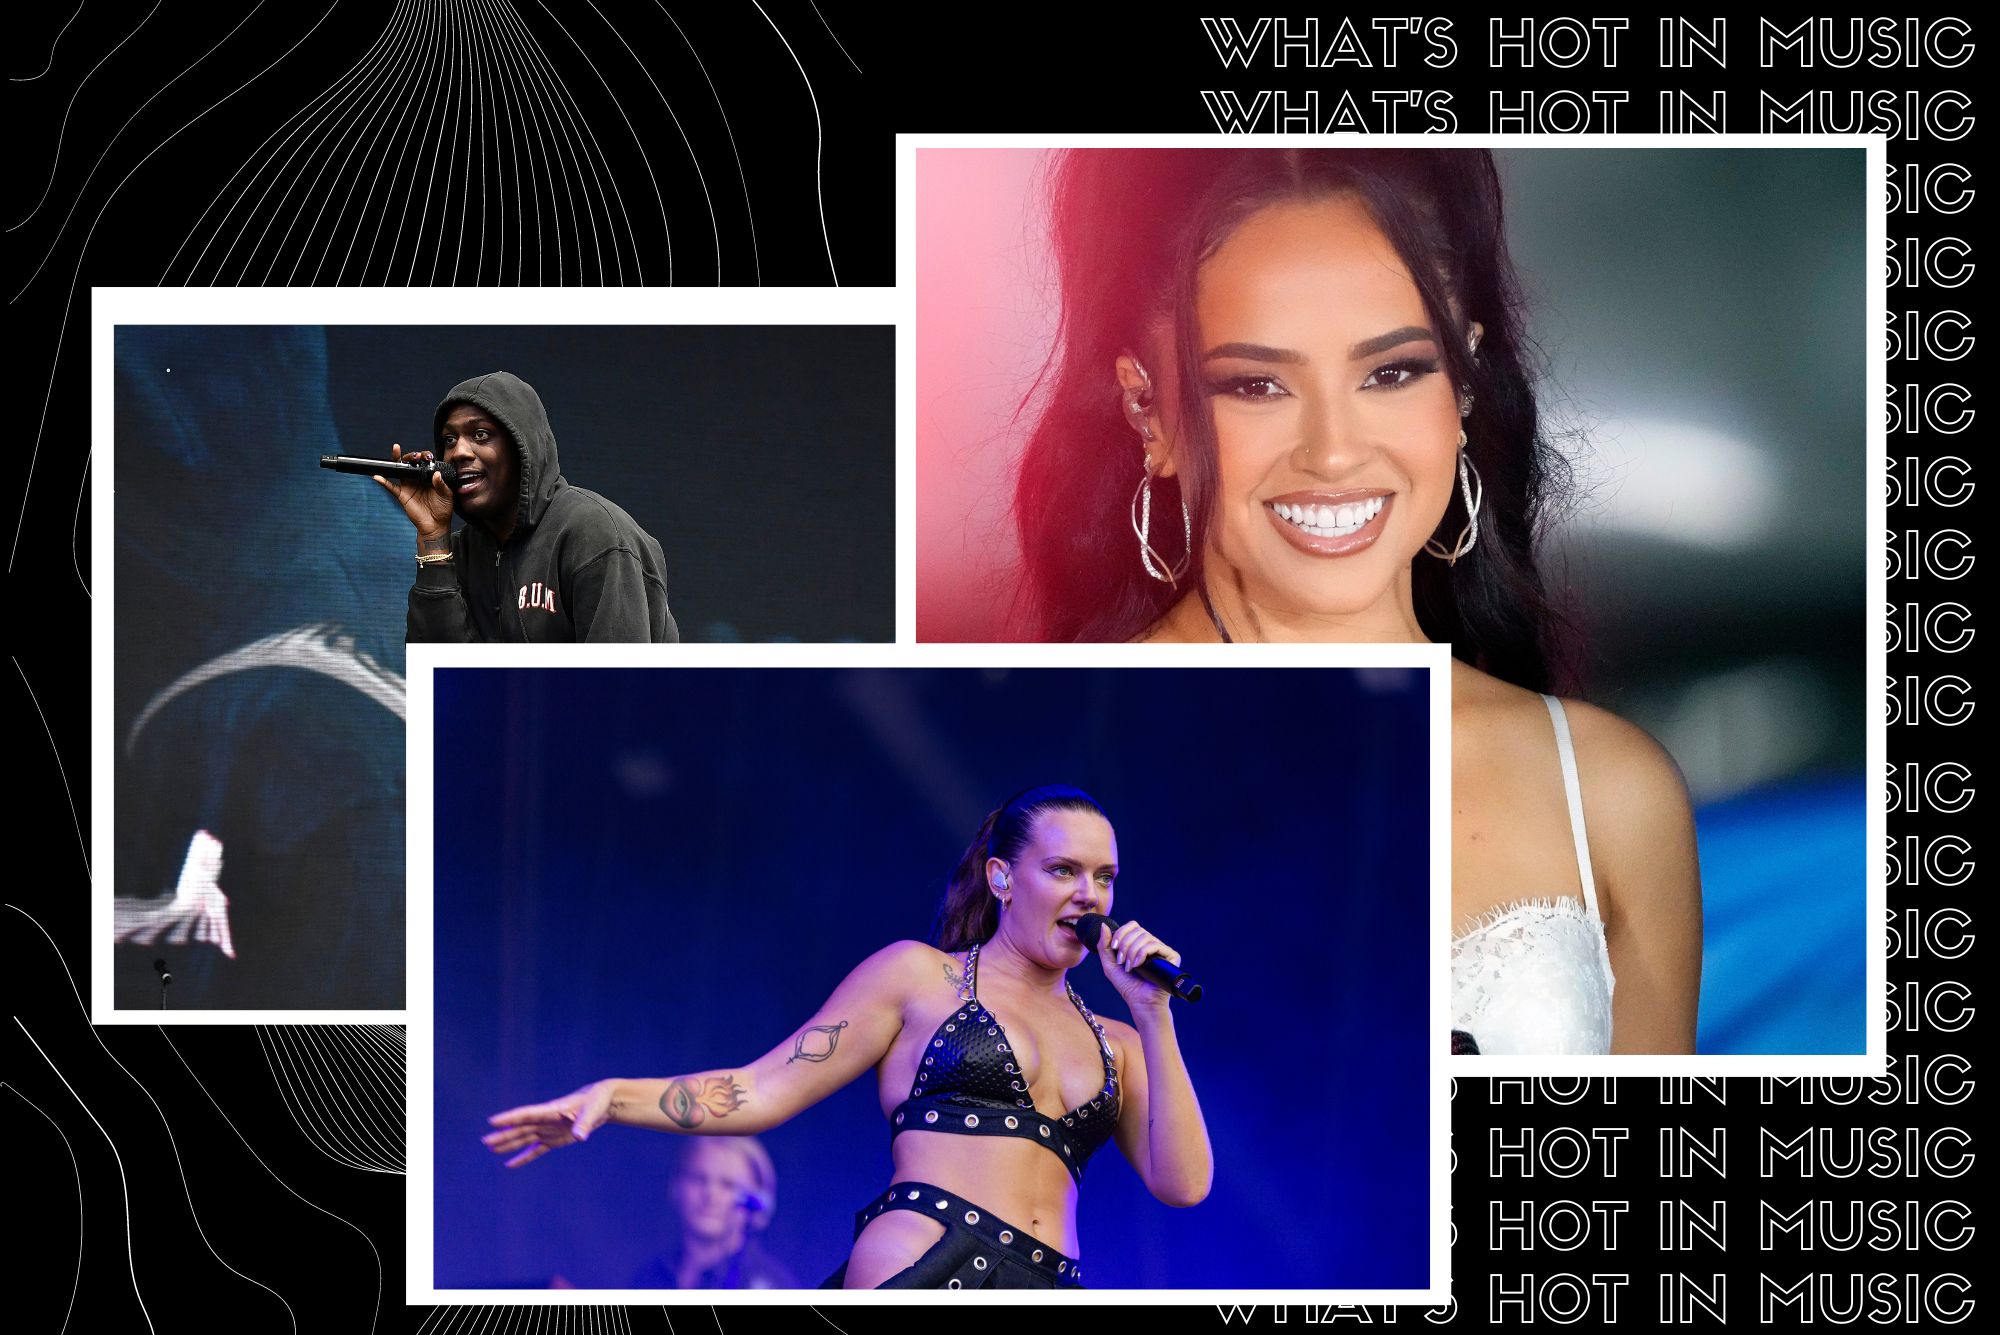 Image: collage of artists either hosting concerts in Boston in September 2023 or with new albums coming out in September. Black background with outline-font white lines features photos of Lil Yachty, Tove Lo, and Becky G. Each photo has white, polaroid-style borders. At left, Lil Yachty performs in concert, mic in hand; he is a Black man wearing a black hoodie and black pants. At right, Becky G, a tan young woman with black hair tied in a high ponytail and wearing a white dress, smiles with mic in hand. Center, Tove Lo is shown performing in concert. A white woman wearing a black leather bra and cut-out pants set, performs with mic in hand on stage. Text on right behind image reads "What's Hot in Music" in a repeating pattern.